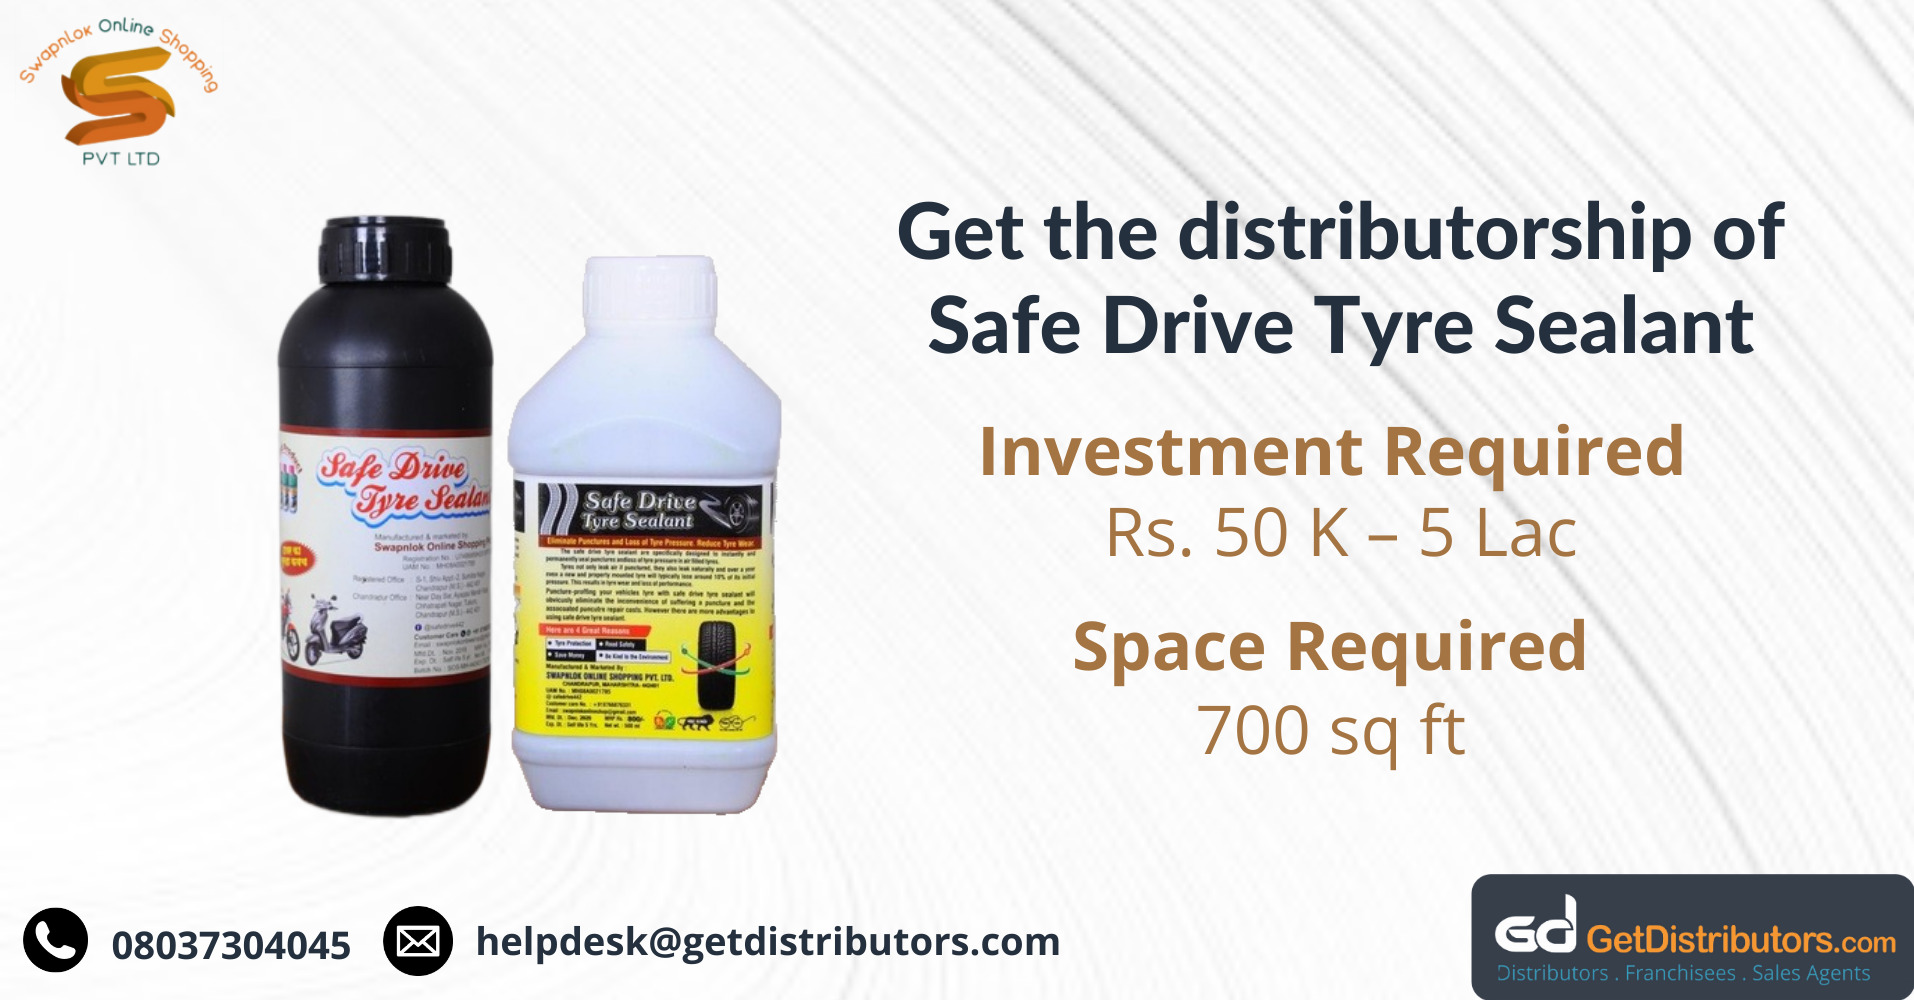 Distributorship opportunity of high-quality tire sealants